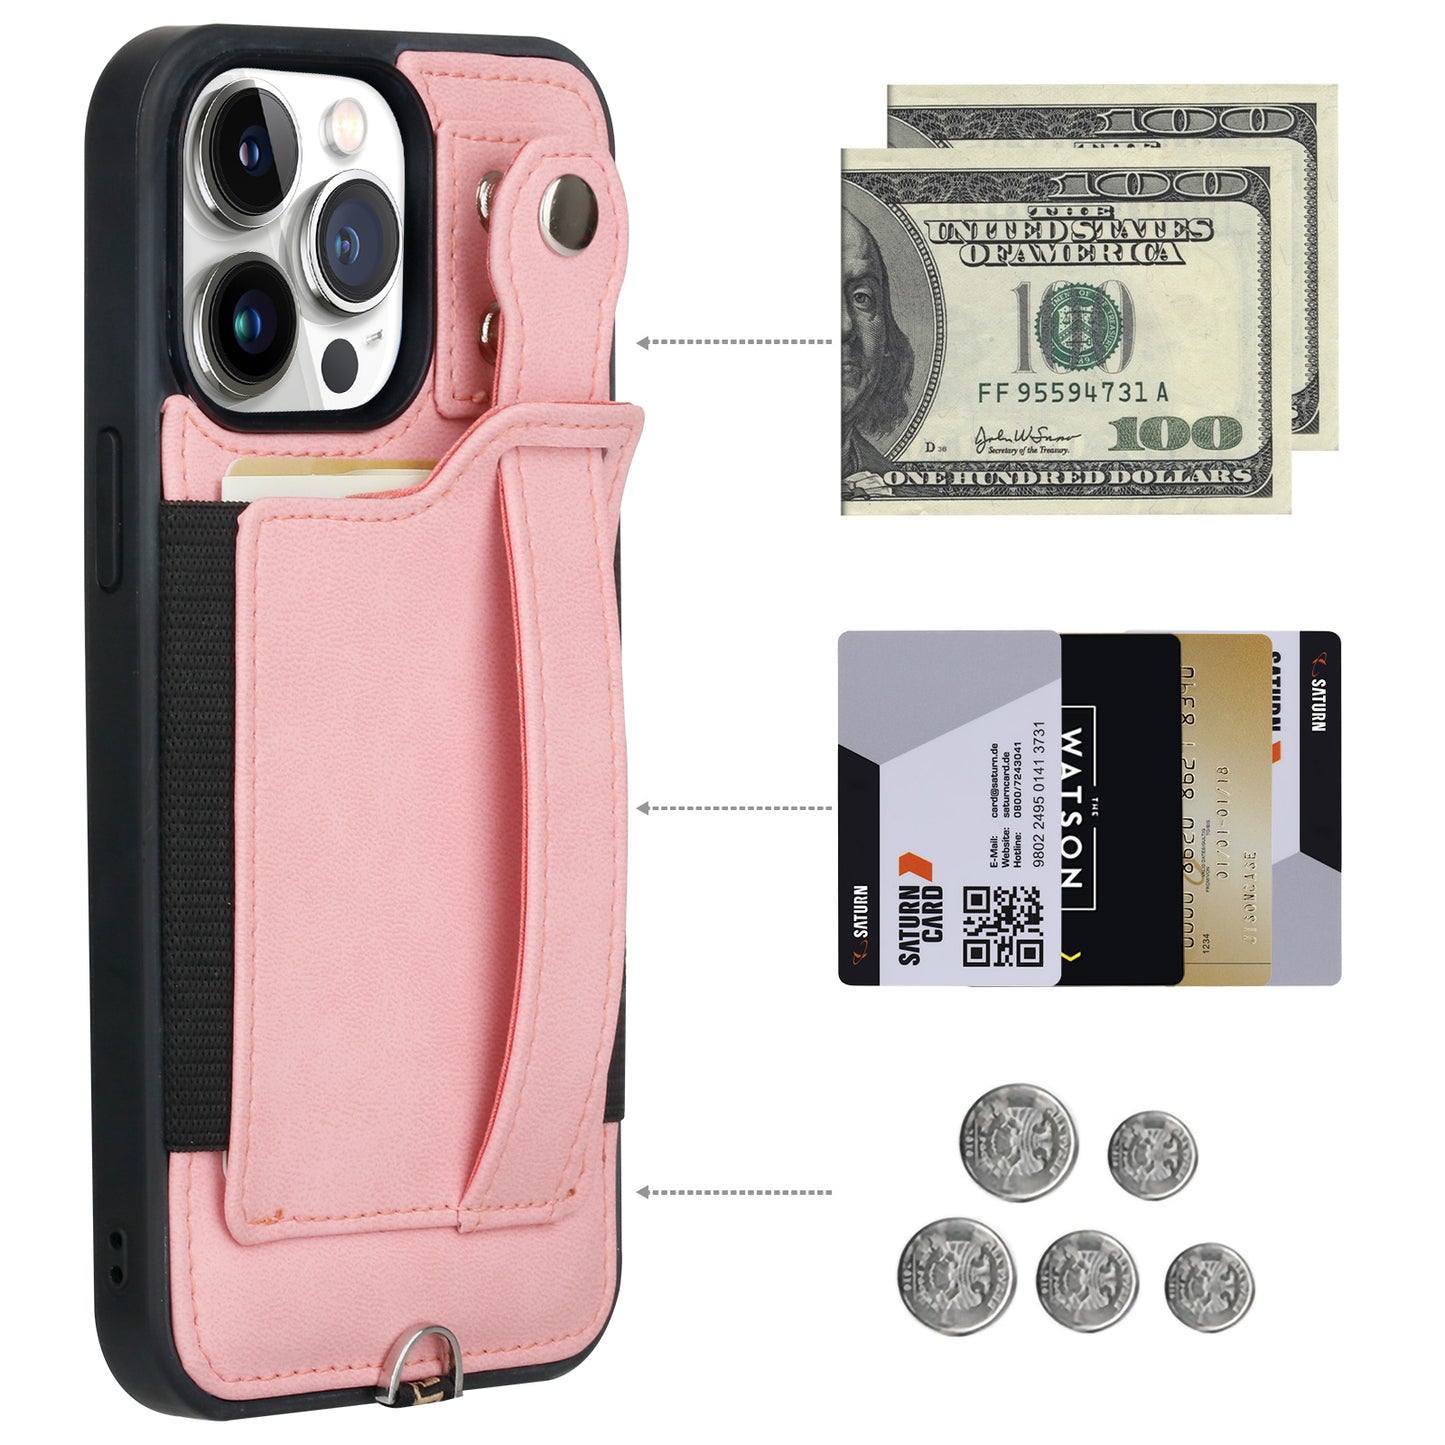 TOOVREN iPhone 11 Pro Max Wallet Case, iPhone 11 Pro Max Case with Card Holder Leather PU 11 Pro Max Case with Stand Adjustable Detachable iPhone Lanyard Strap for iPhone 11 Pro Max